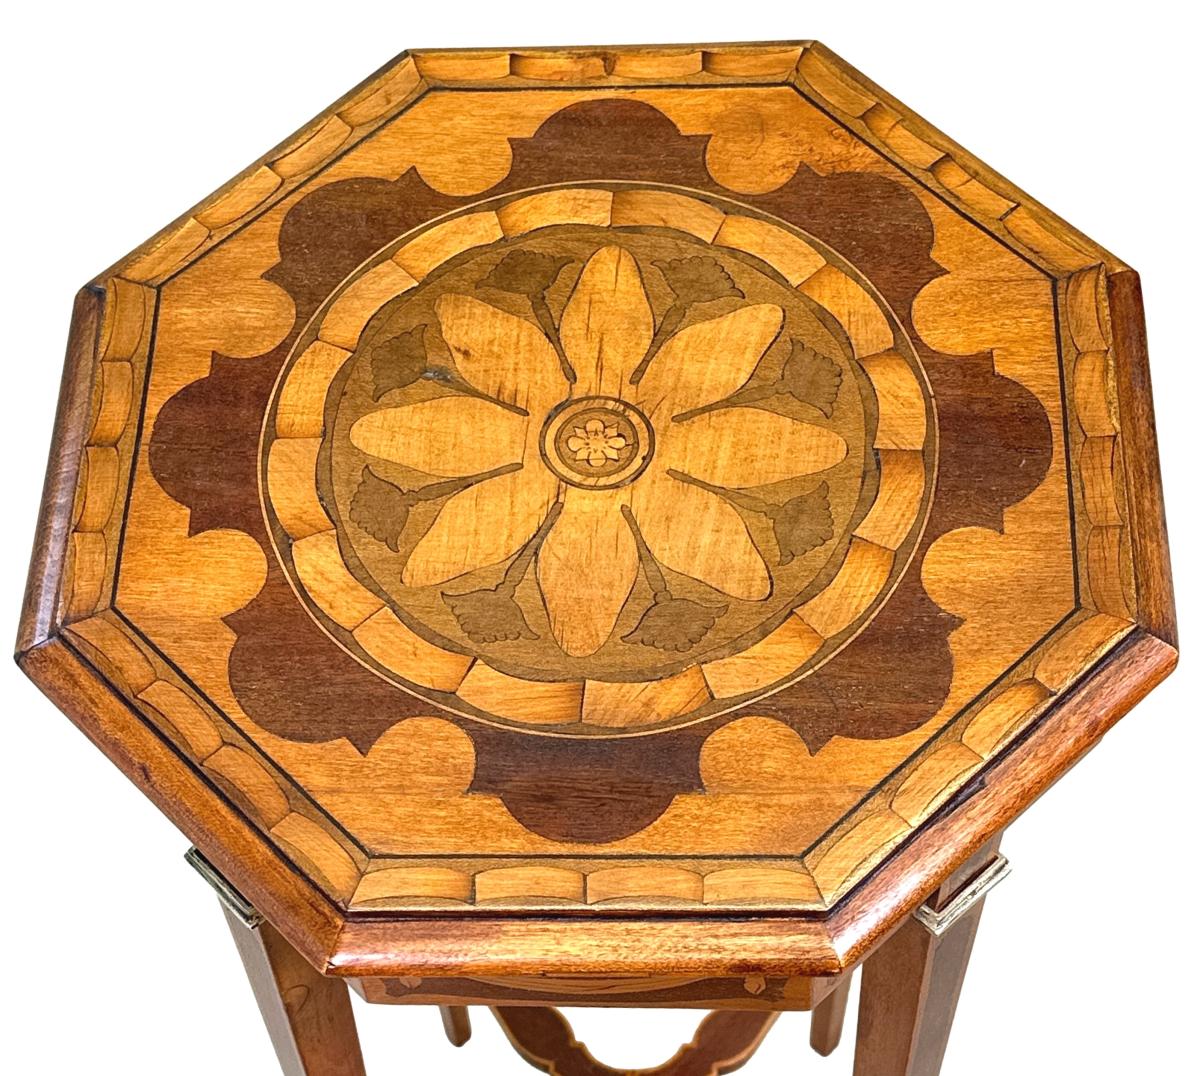 Octagonal Late 19th Century Mahogany & Satinwood Occasional Table